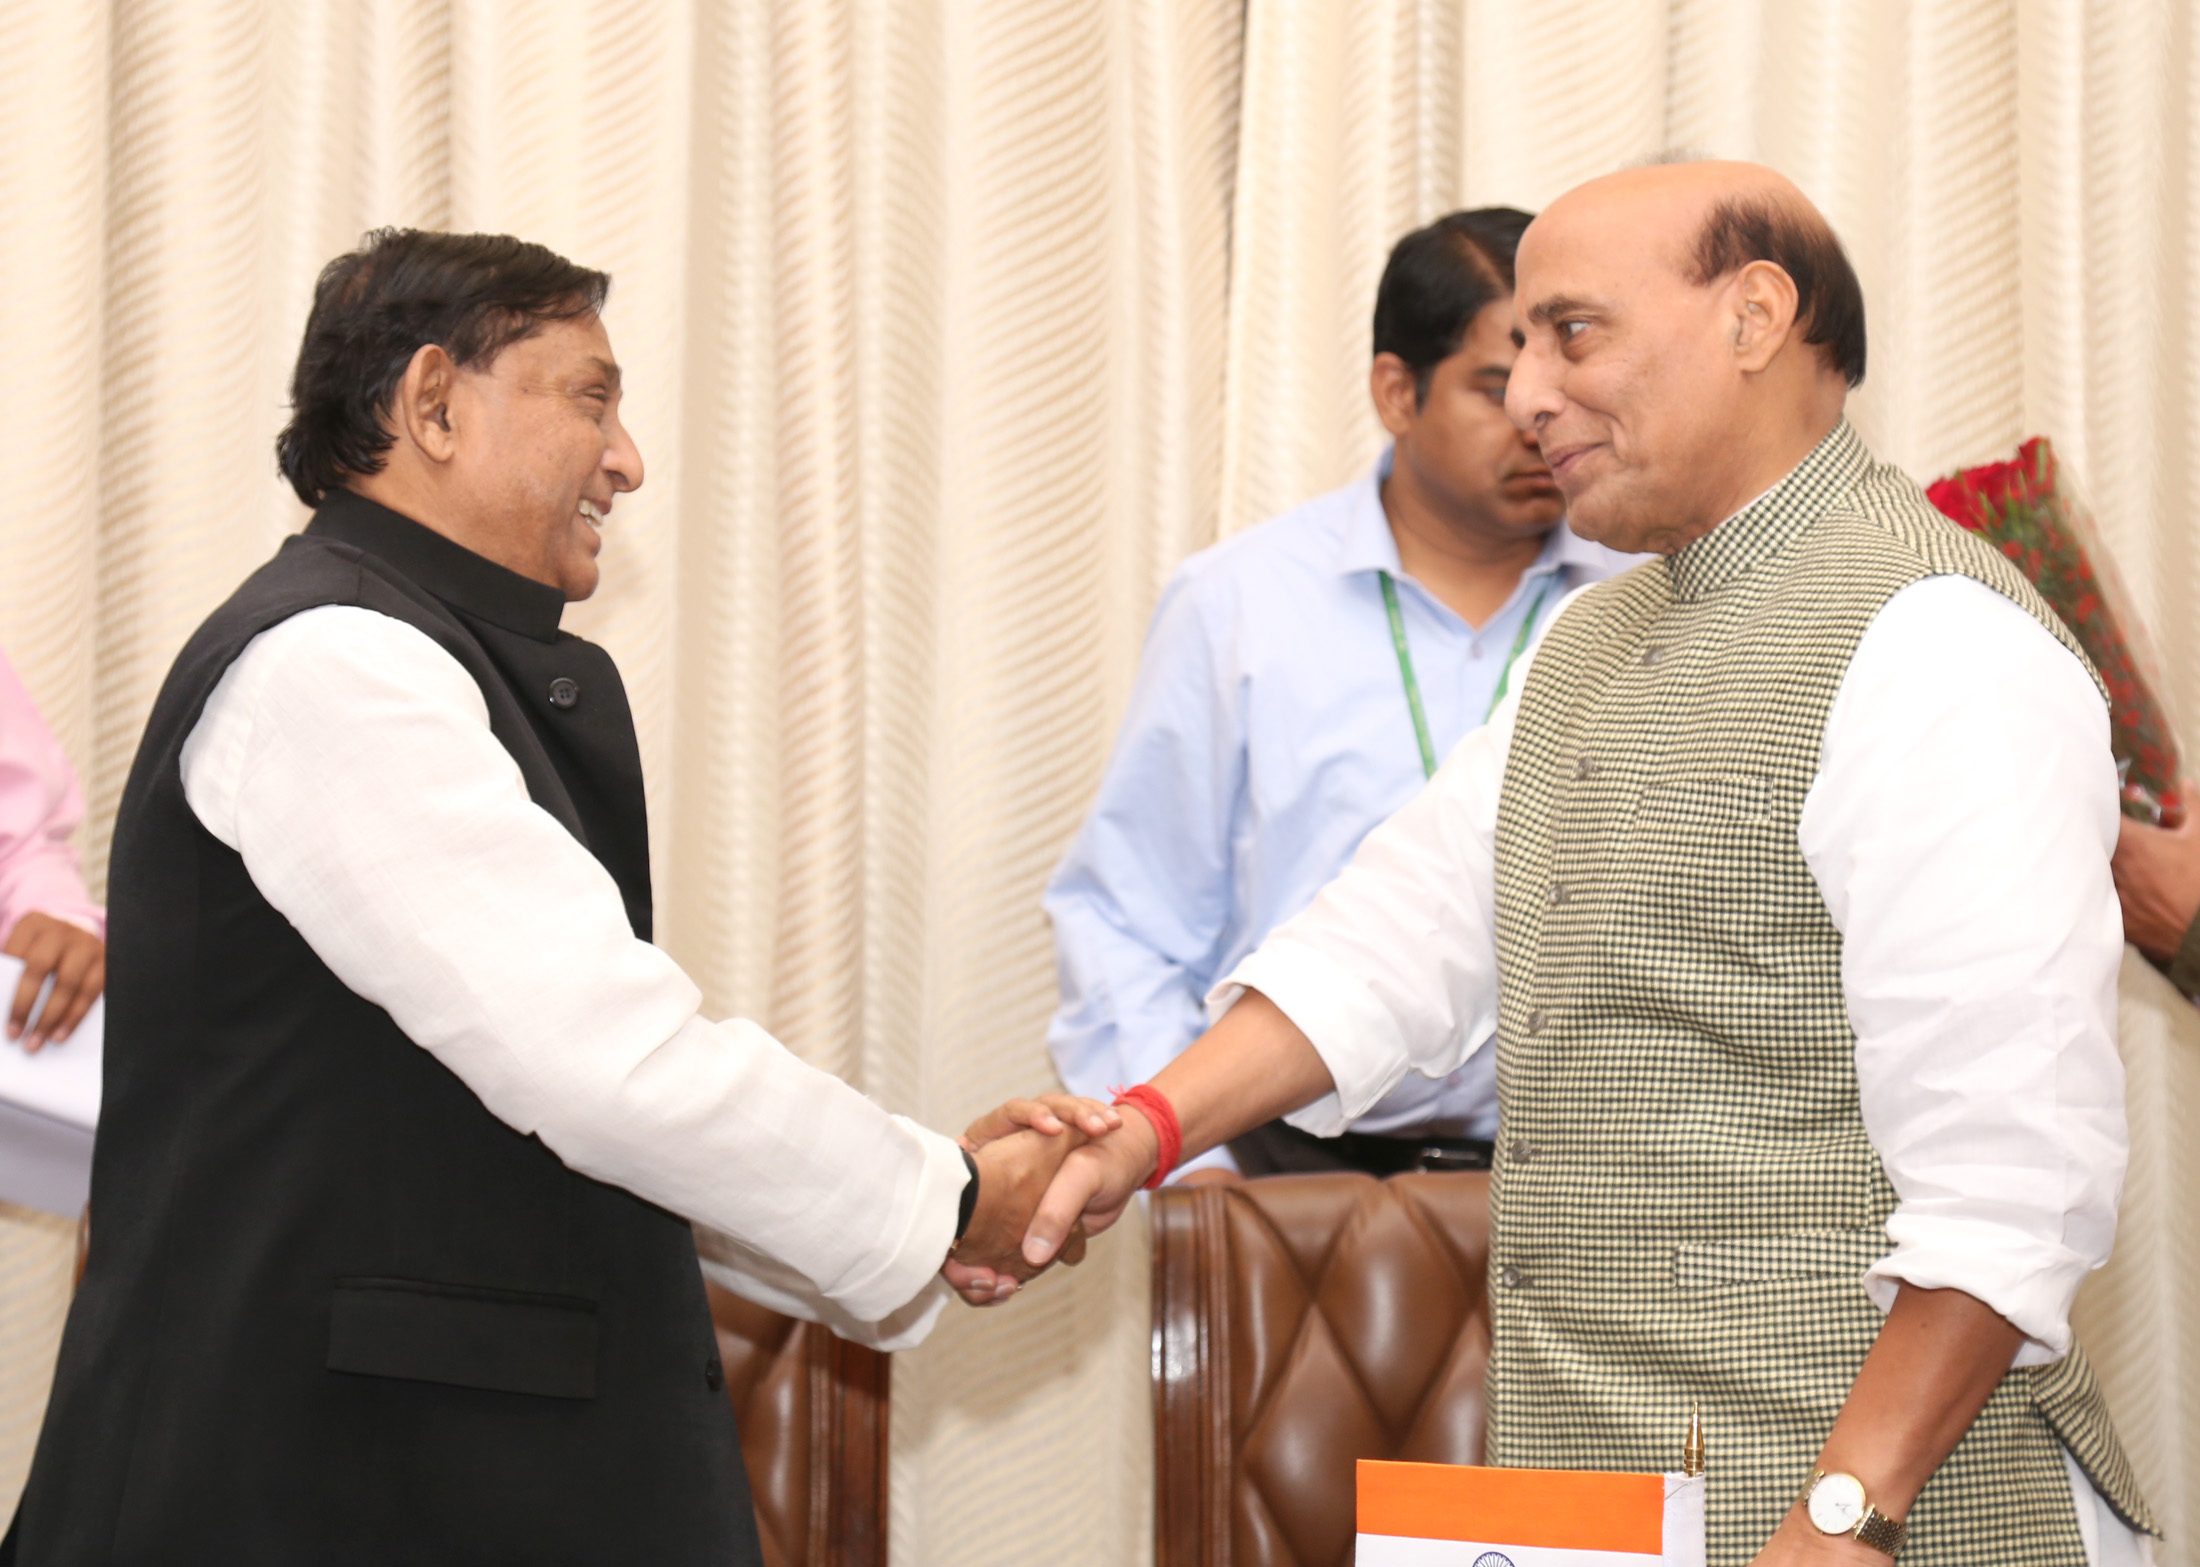 The Minister of Disaster Management & Relief, Bangladesh, Mr. Mofazzal Hossain Chowdhury Maya calling on the Union Home Minister, Shri Rajnath Singh, in New Delhi on November 04, 2016.